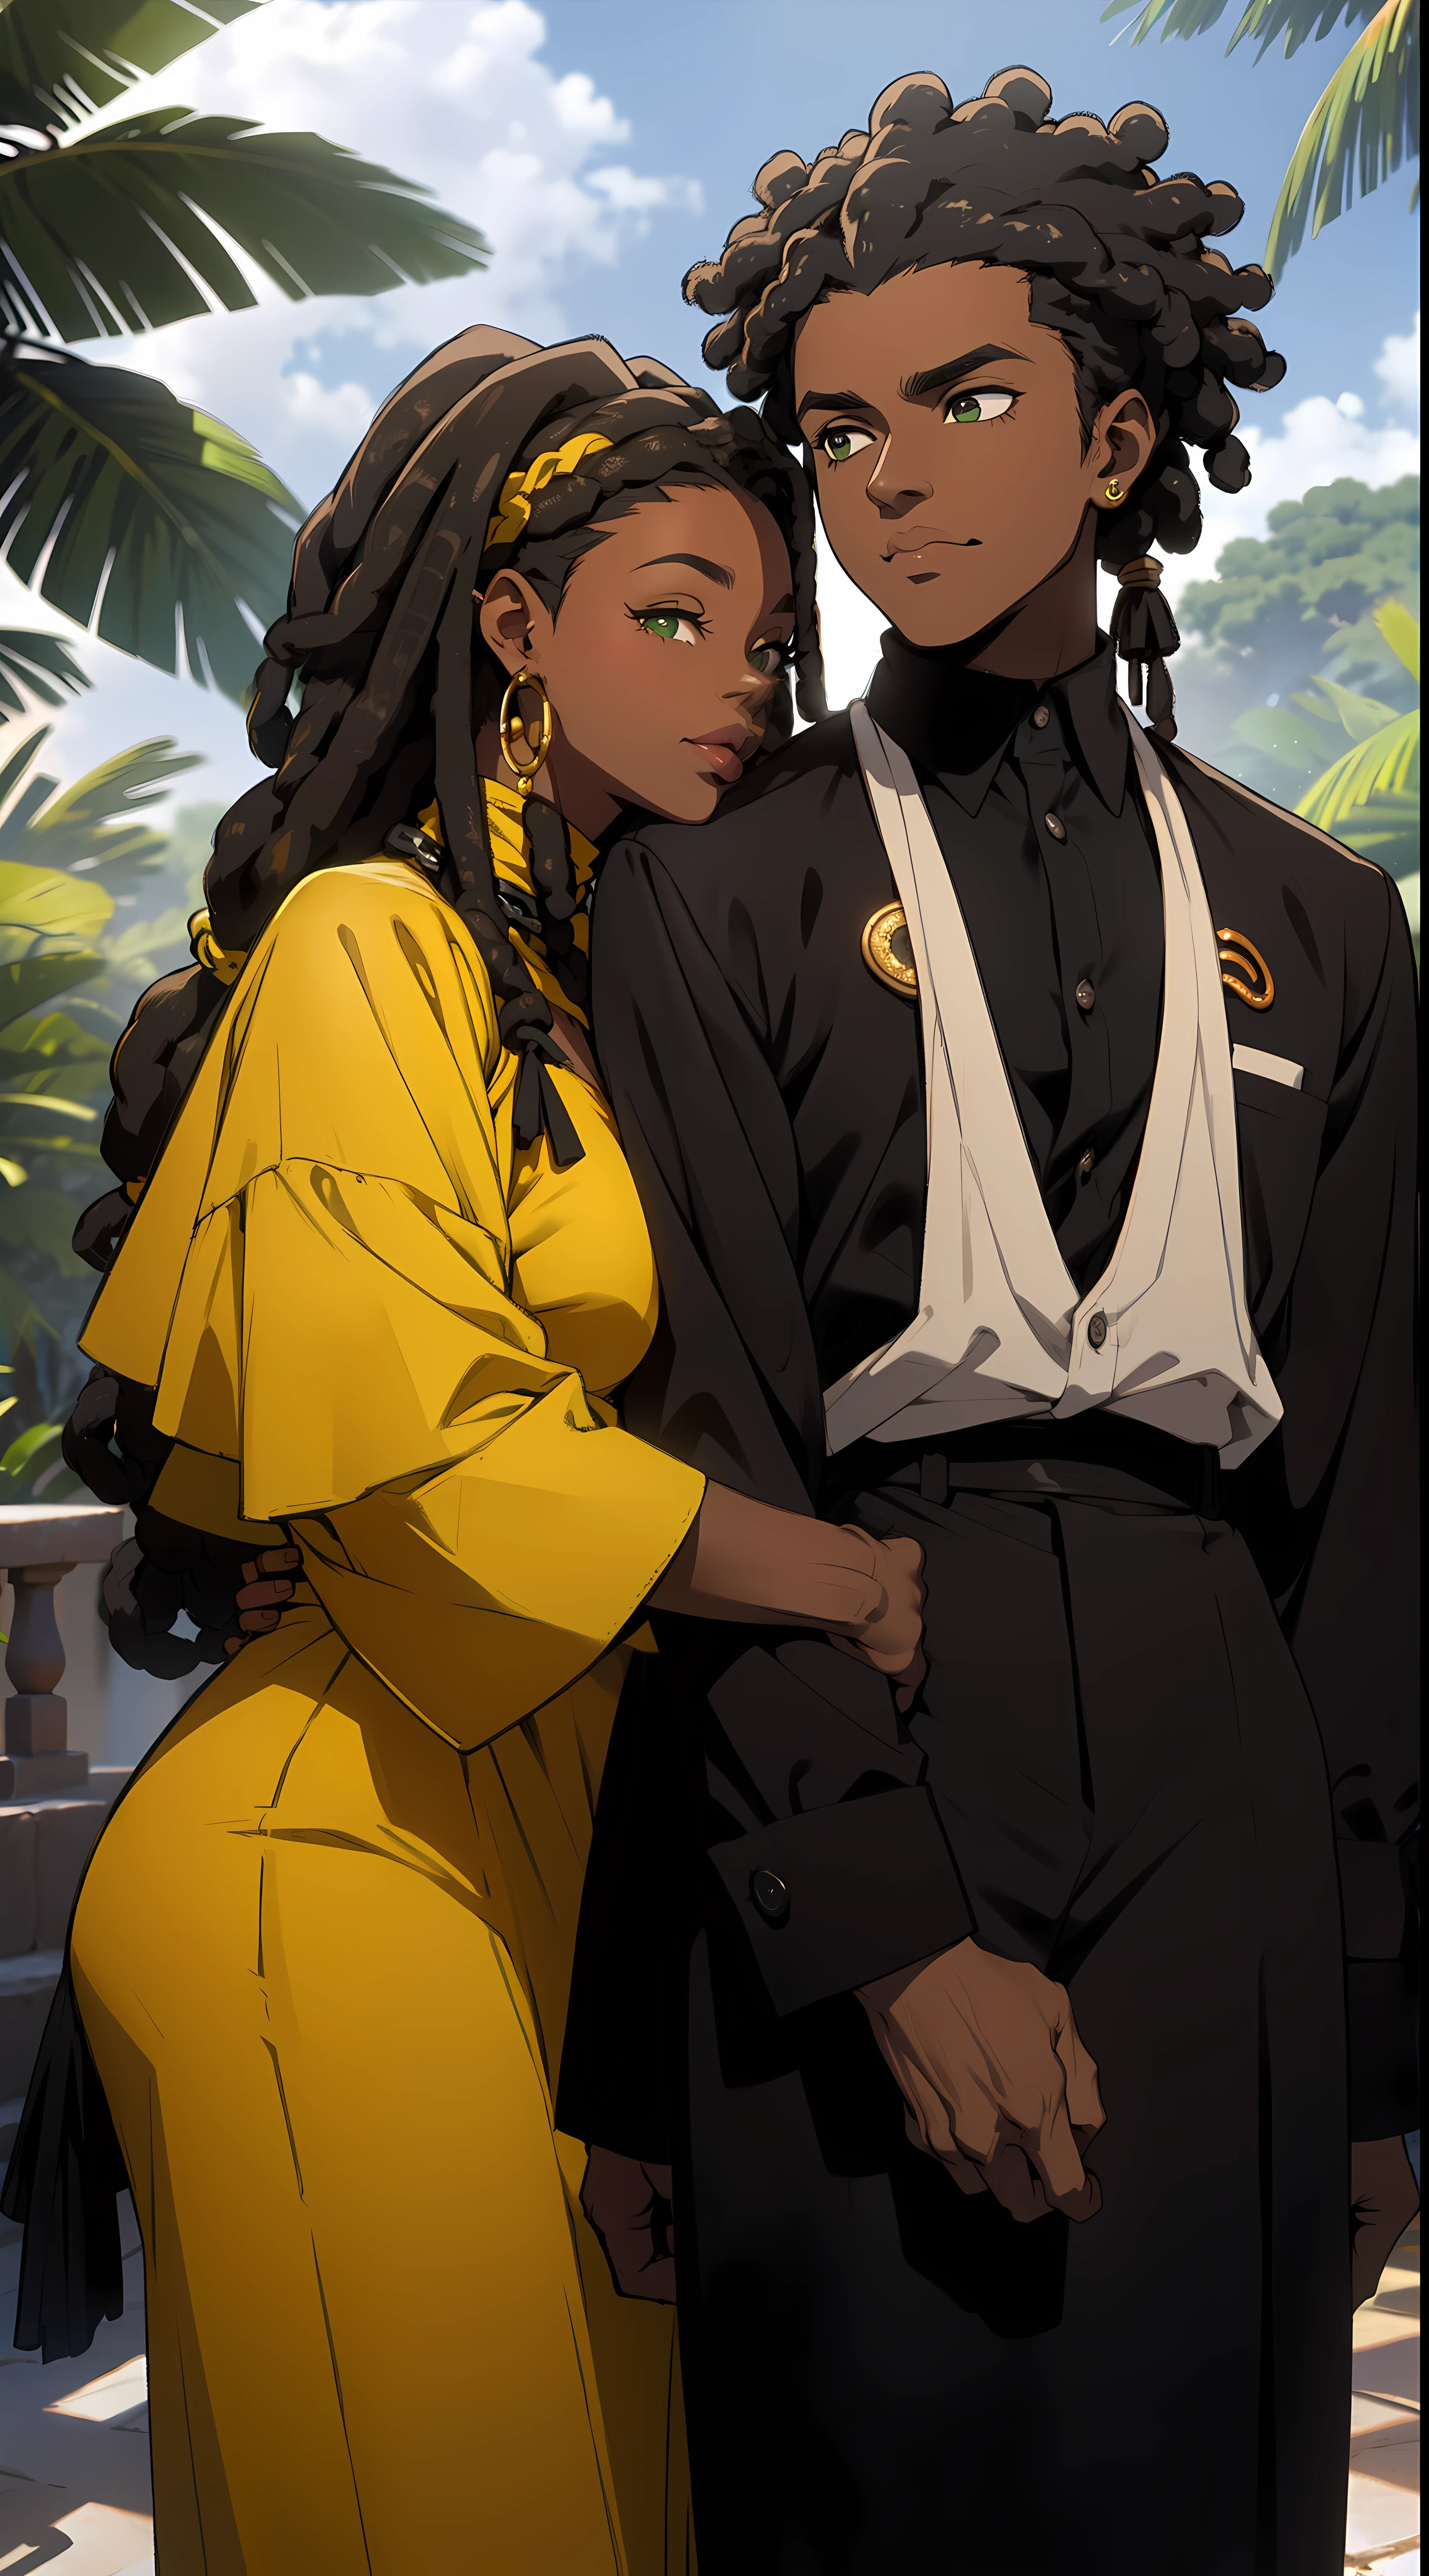 "Produce an anime-style image that celebrates love between black couples. The girl, skin black, skin black, skin black 1.5,  with black leather and thin African braids, it has ((greeneyes)) charming. Your partner, {dark-skinned and haired: 1,5}, ((Dreadlocks curtos)), has expressive white eyes. Both wear loose coats with gold details., adding a touch of sophistication. Set in a garden, the scene depicts passionate kisses between them. Convey the intensity of eternal love between these black lovers, highlighting their unique characteristics and the romantic connection they share. trench coat {((stylish sweaters, super trendy, super look))}".